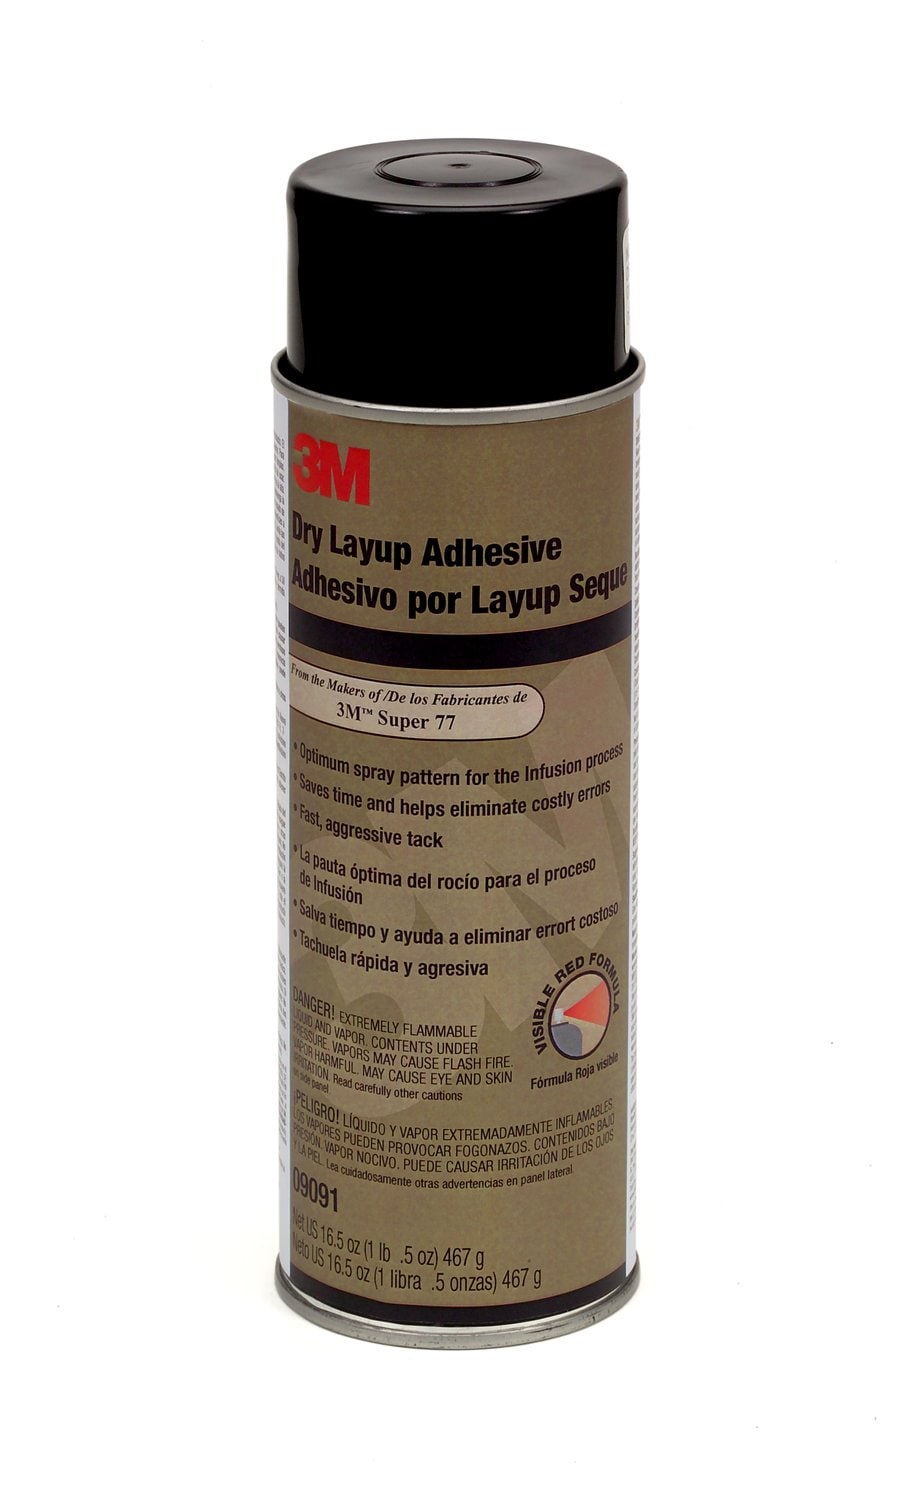 7100010064 - 3M Dry Layup Adhesive 1.0 09091, 467g, aerosol, red, 12 Cans/Box, 12
Canisters/Case